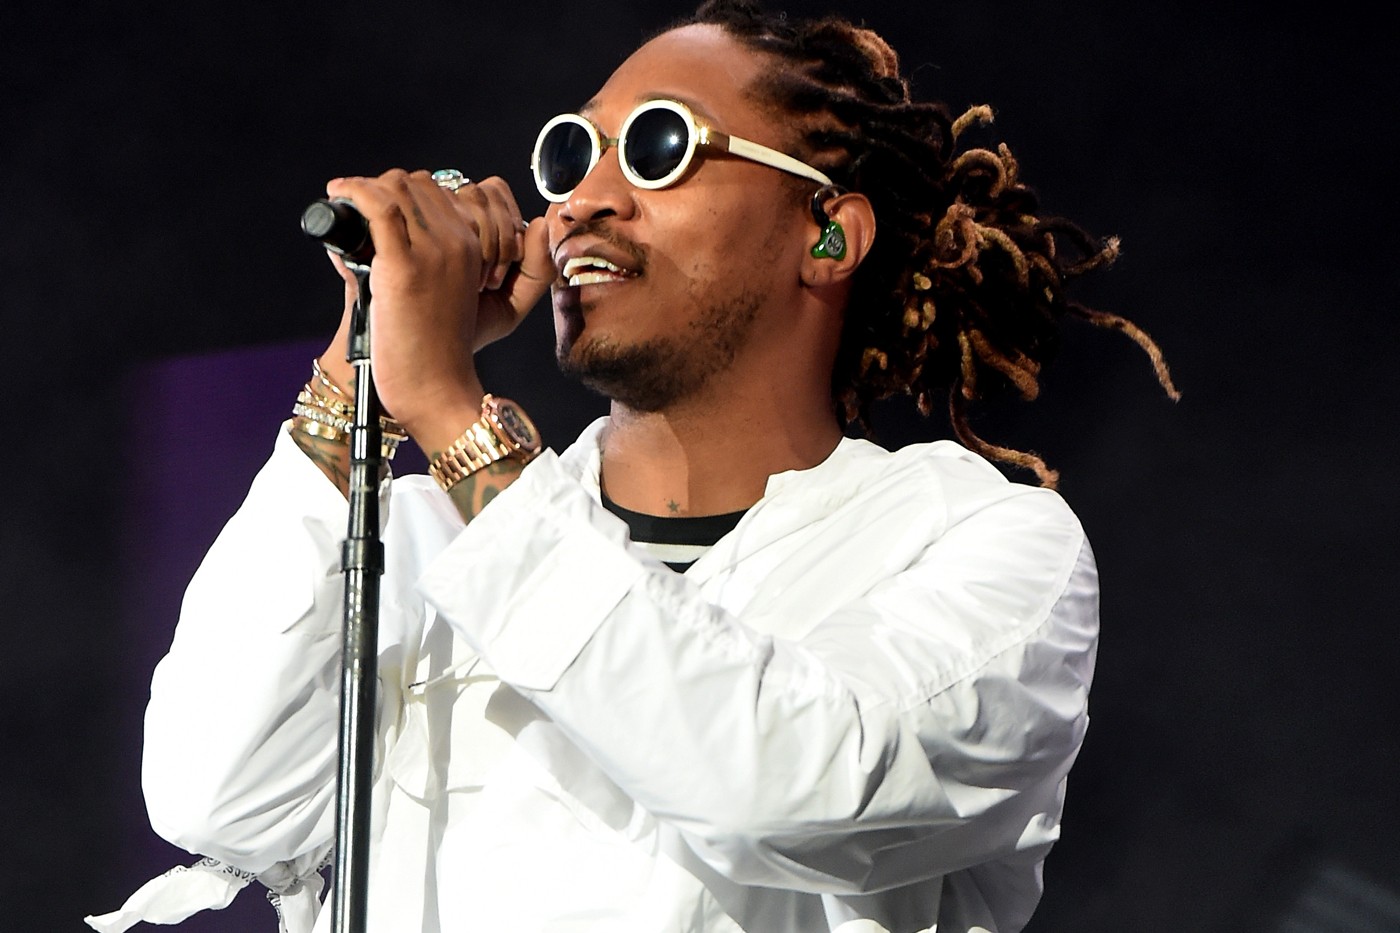 Listen to Another Future's New Track "Rings on Me"